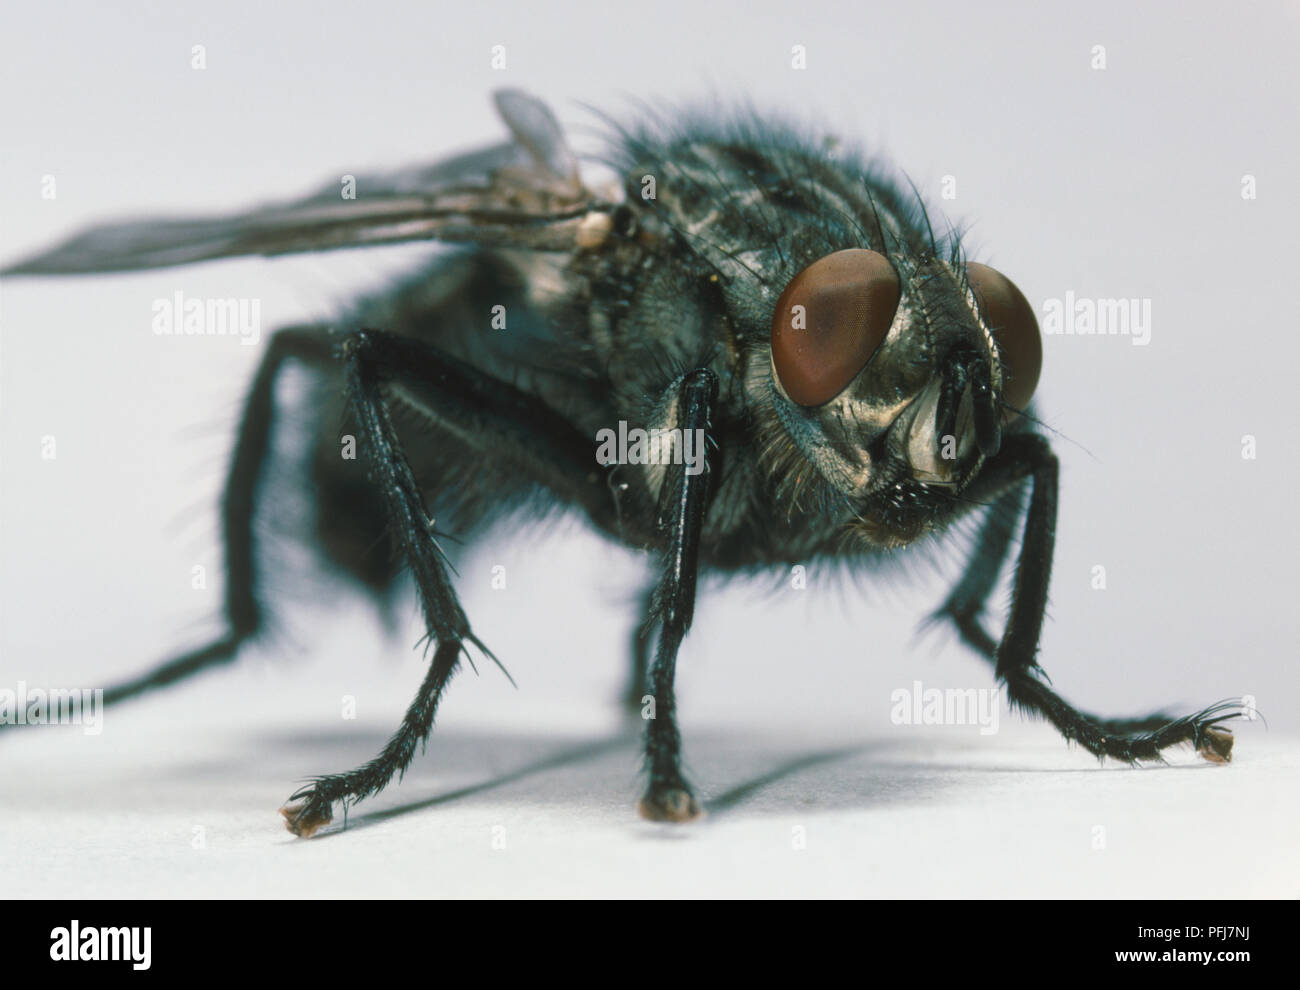 Close up of housefly (Musca domestica), hairy body, spindly legs and reddish brown eyes, front and side view Stock Photo